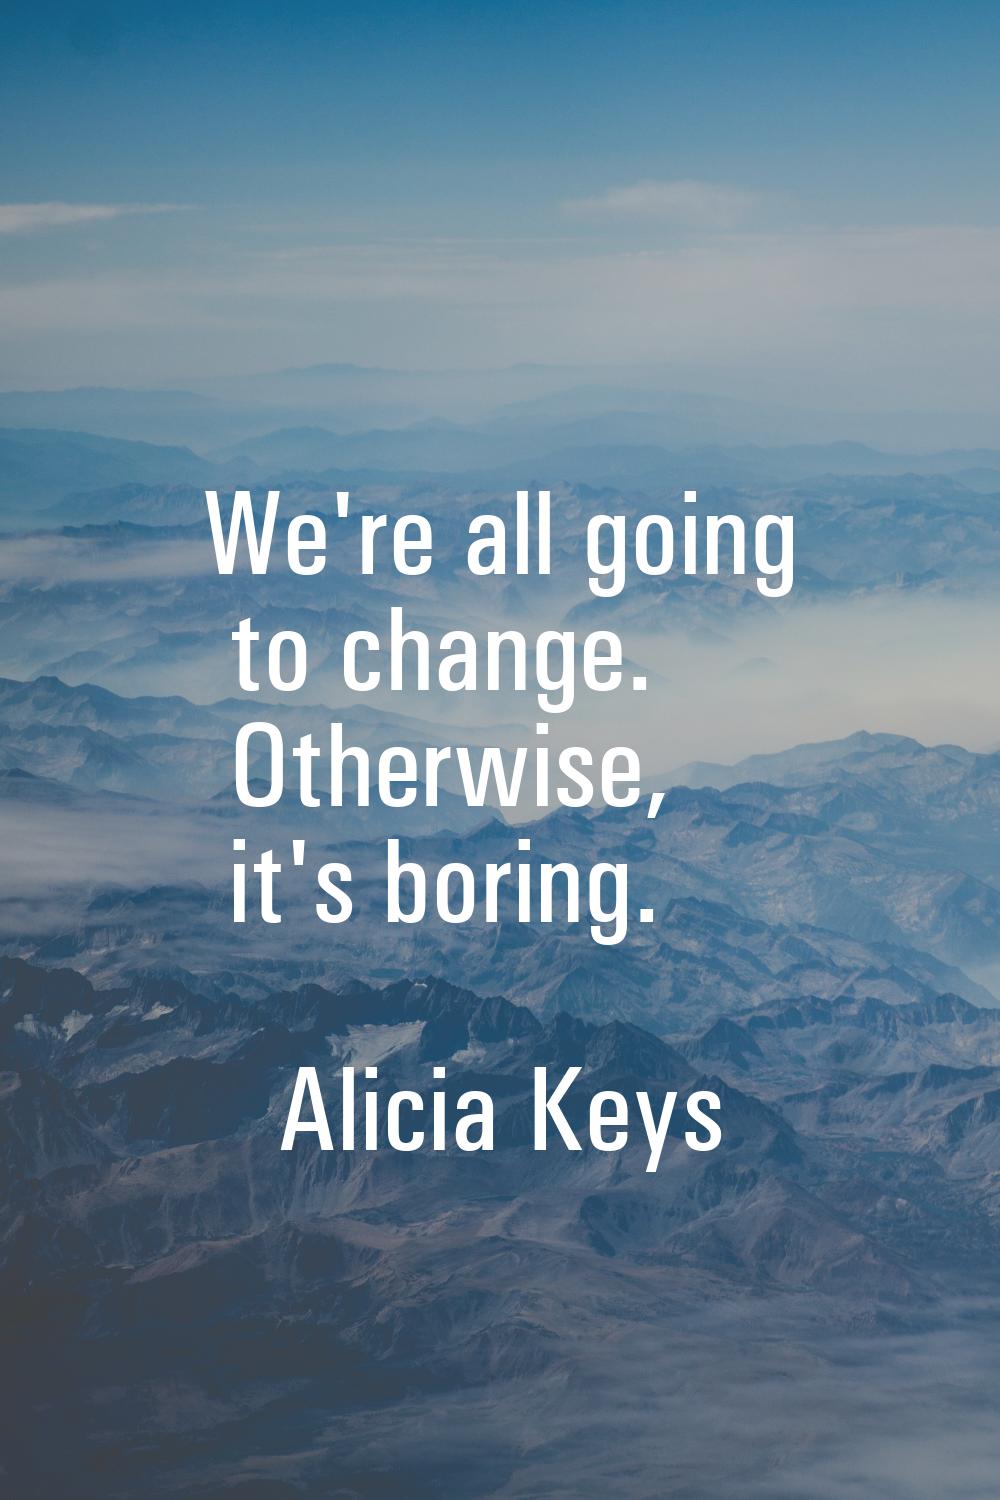 We're all going to change. Otherwise, it's boring.